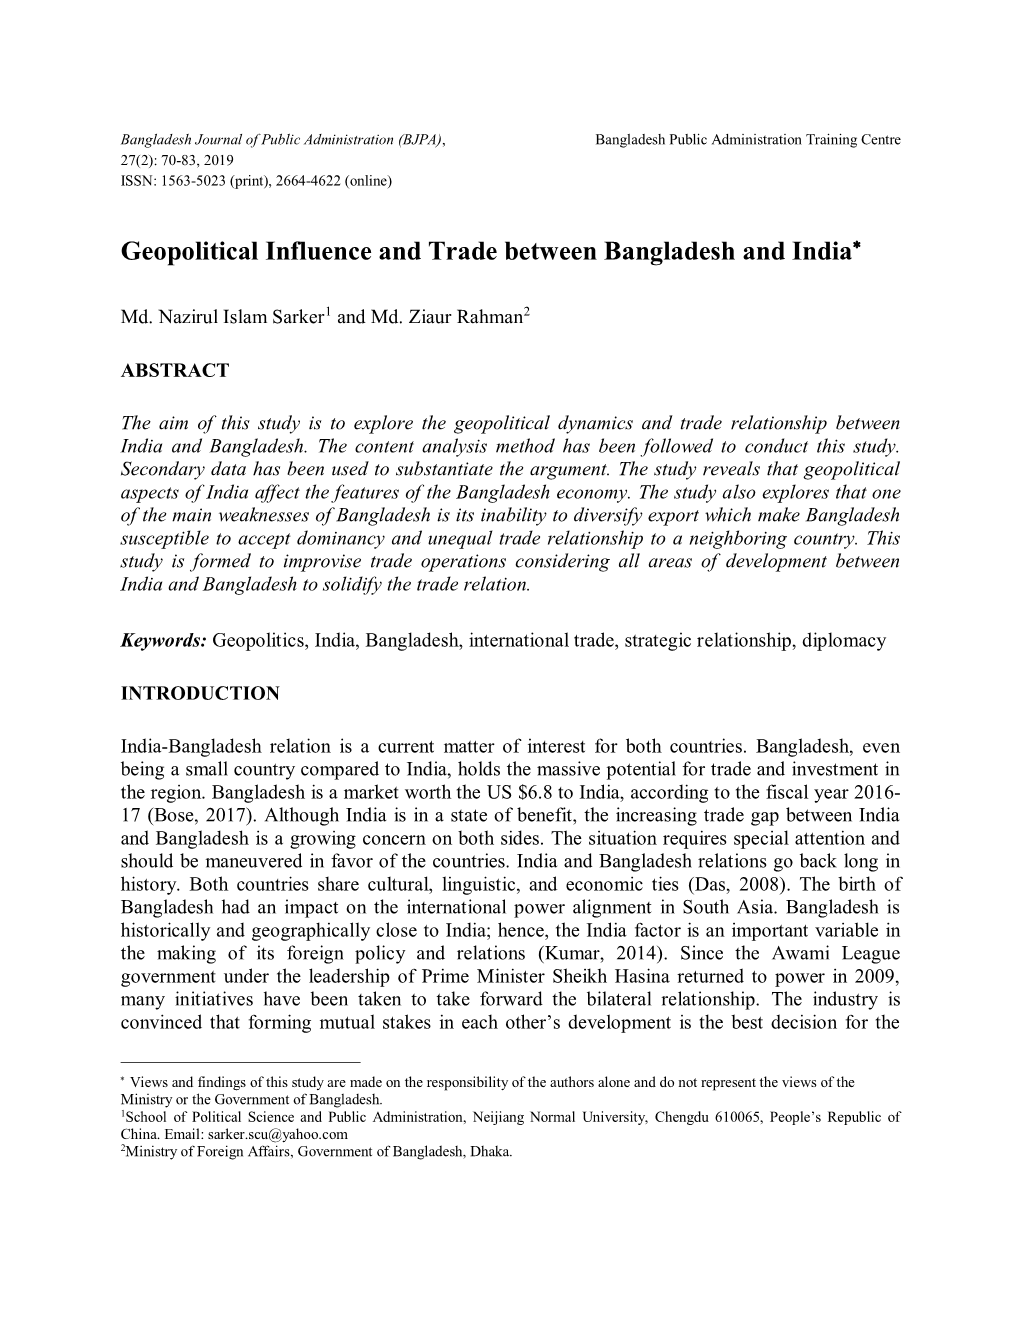 Geopolitical Influence and Trade Between Bangladesh and India